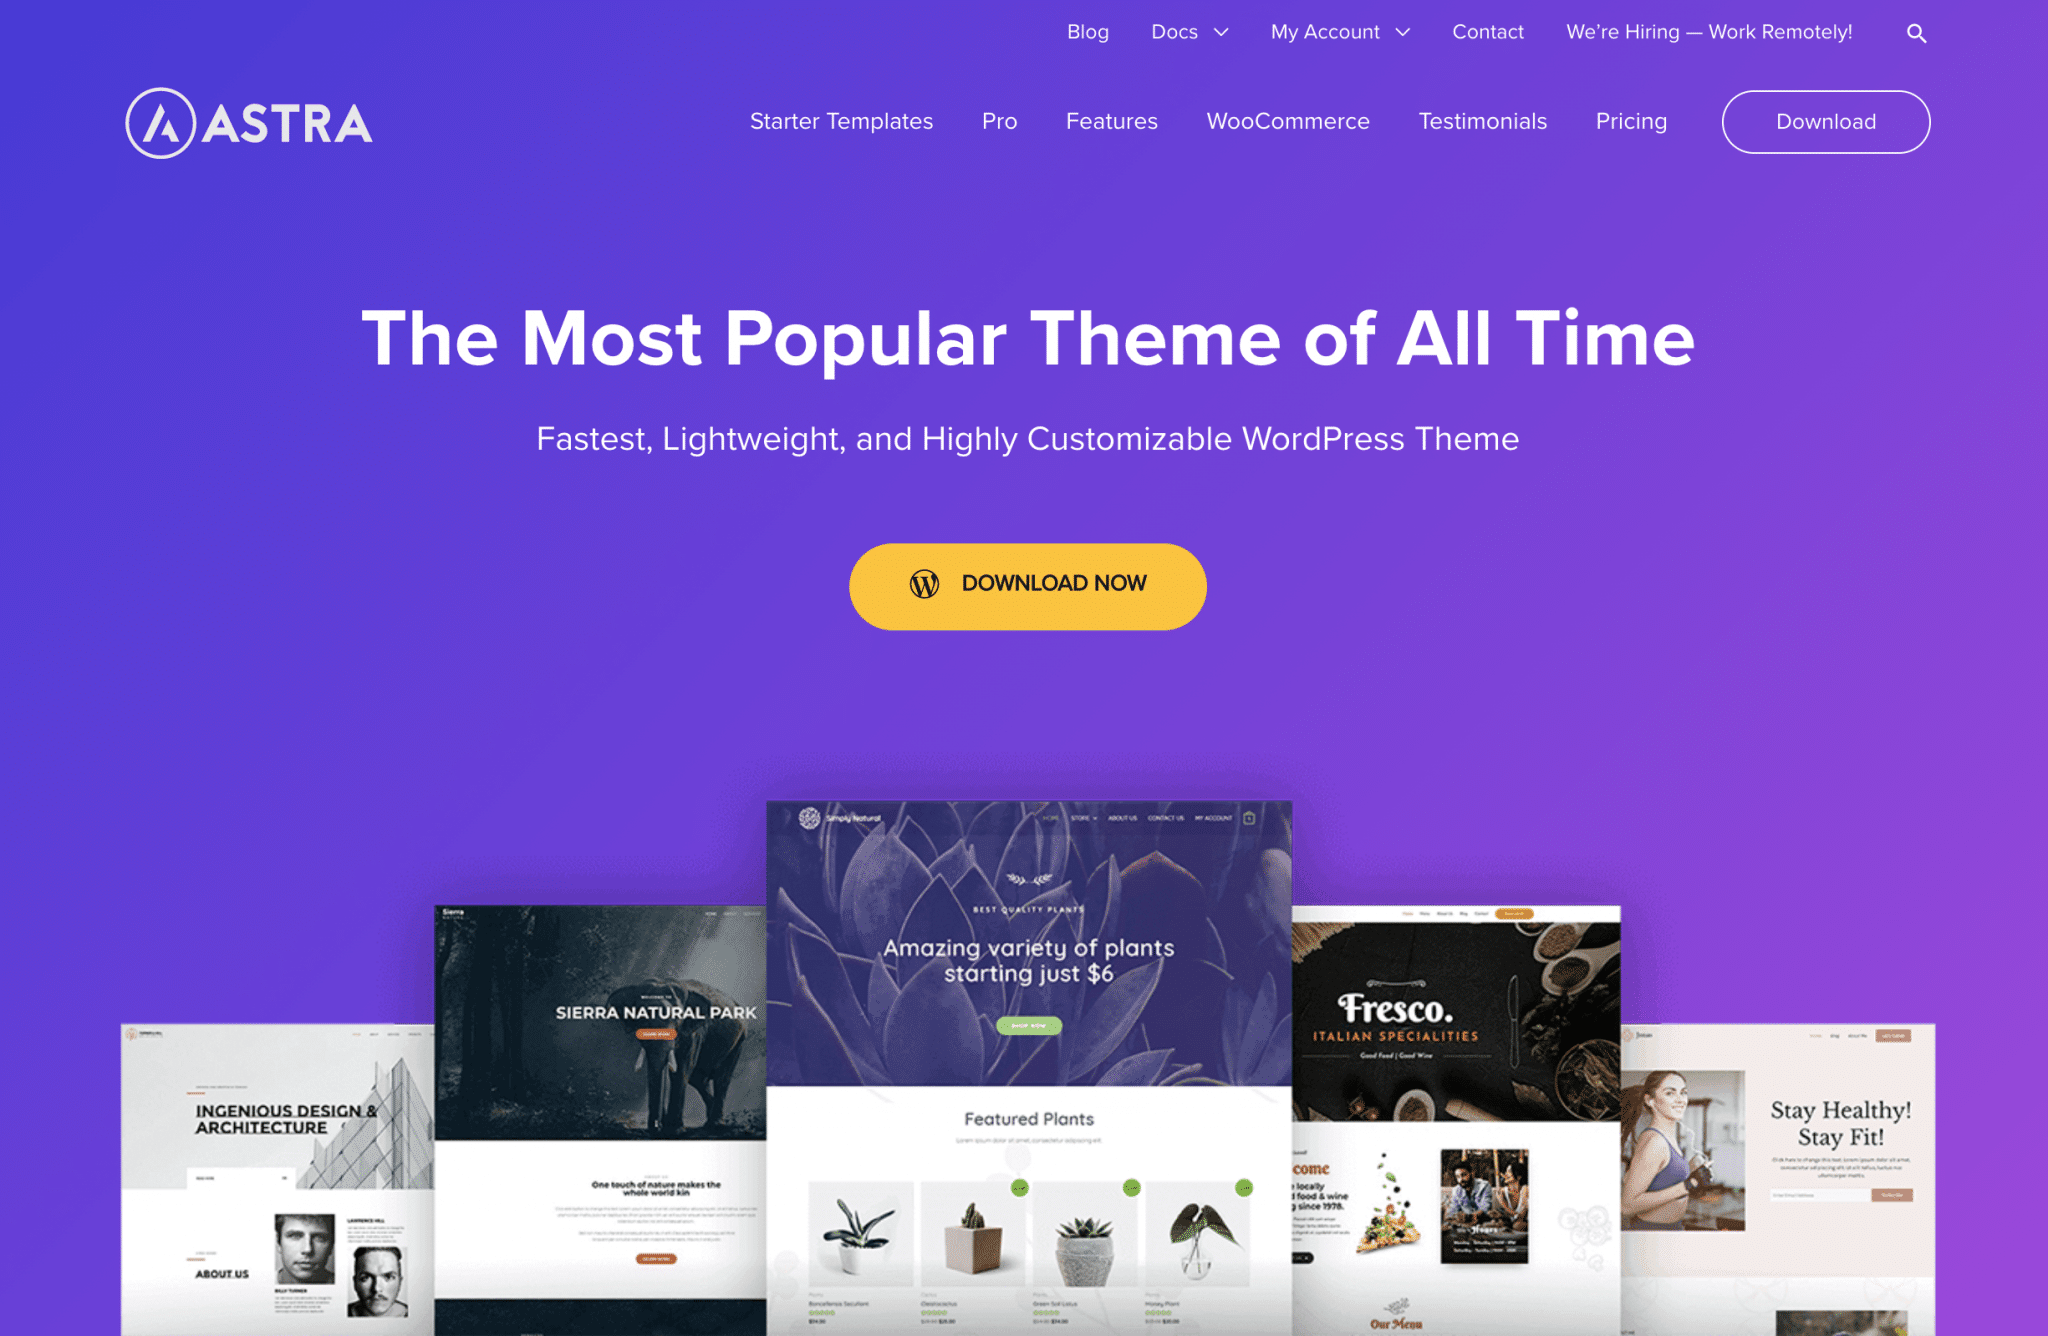 Astra theme offers landing pages options for your WordPress site.